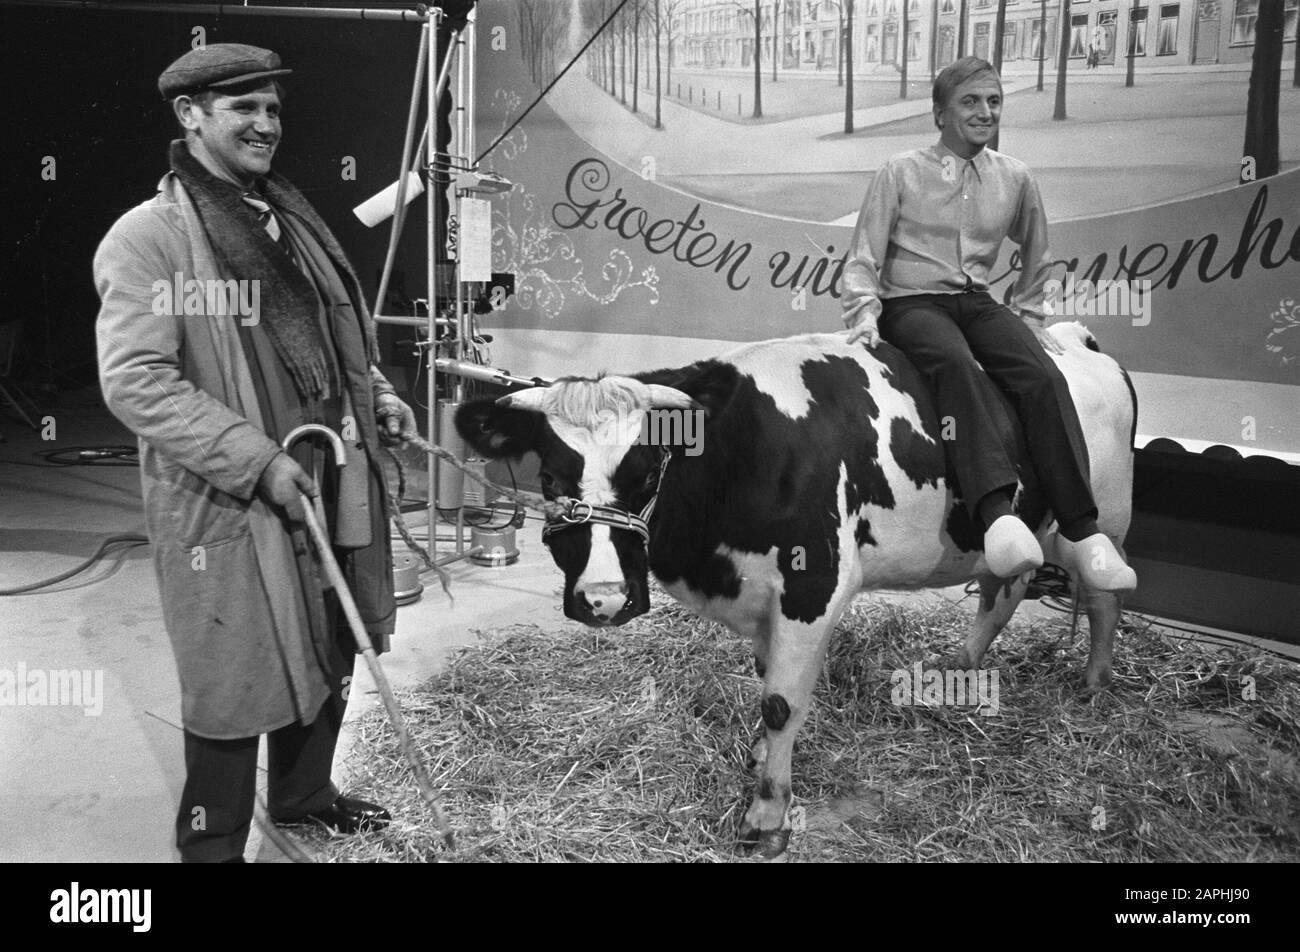 The cow on which Leen Jongewaard must sit Date: 23 December 1969 Keywords: TV shows, cows Stock Photo